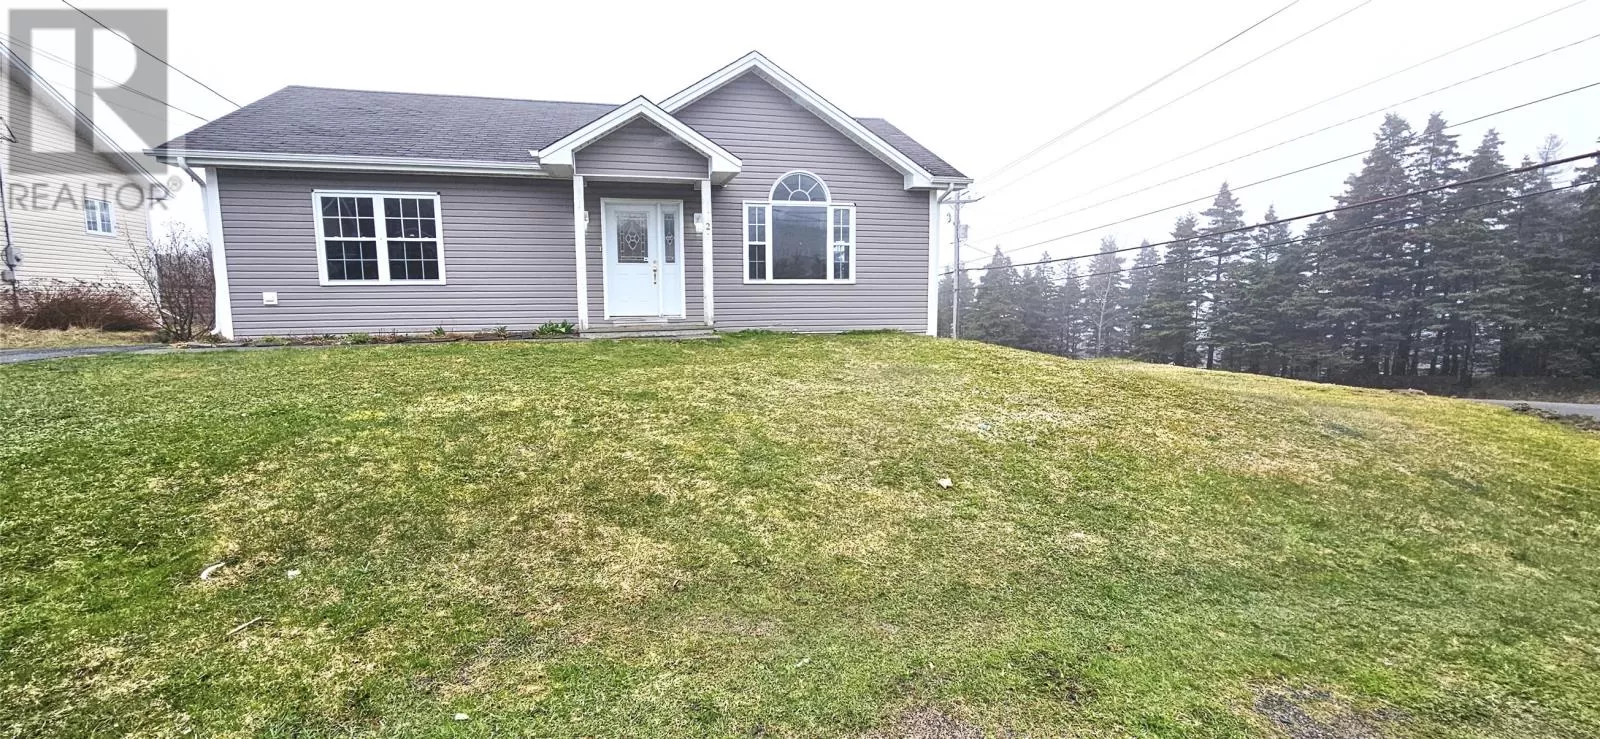 House for rent: 2 Discovery Place, Carbonear, Newfoundland & Labrador A1Y 1A1